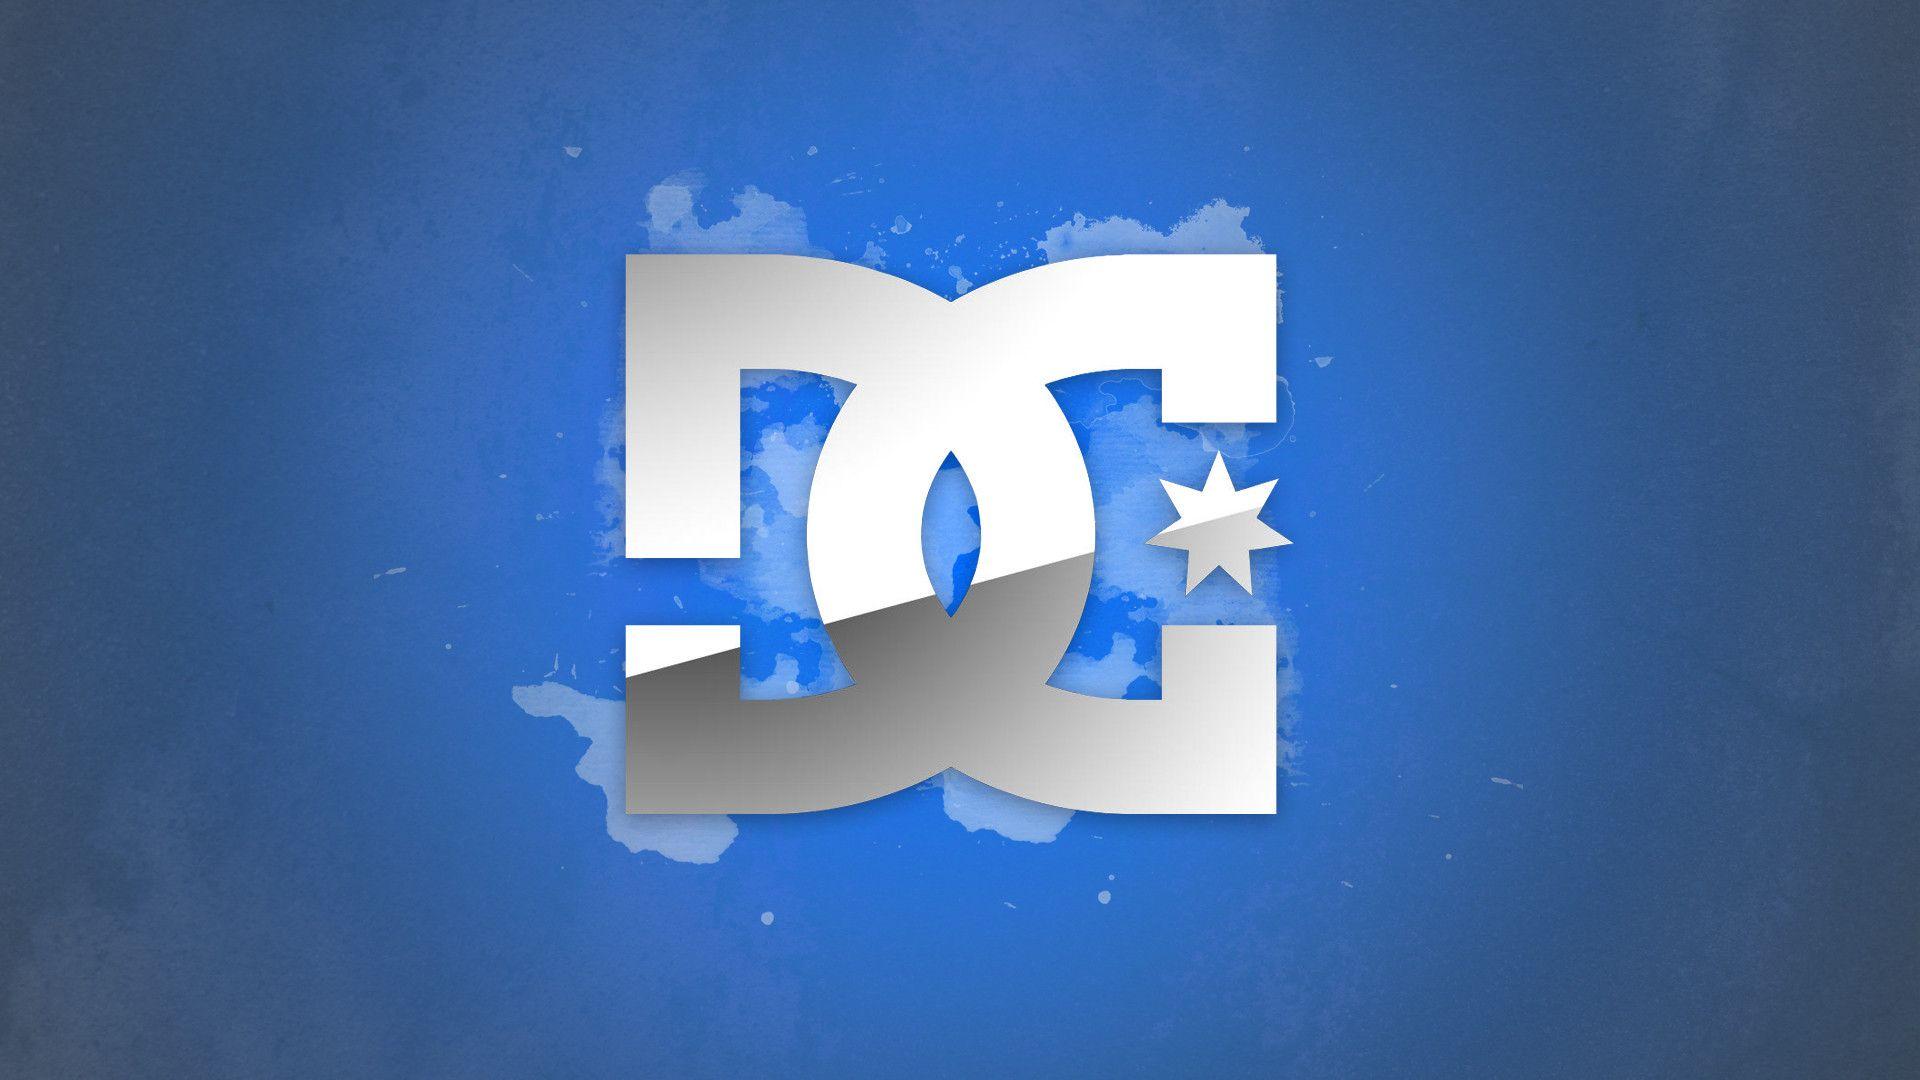 Free Download Dc Shoes Logo Wallpapers 1920x1080 For Your